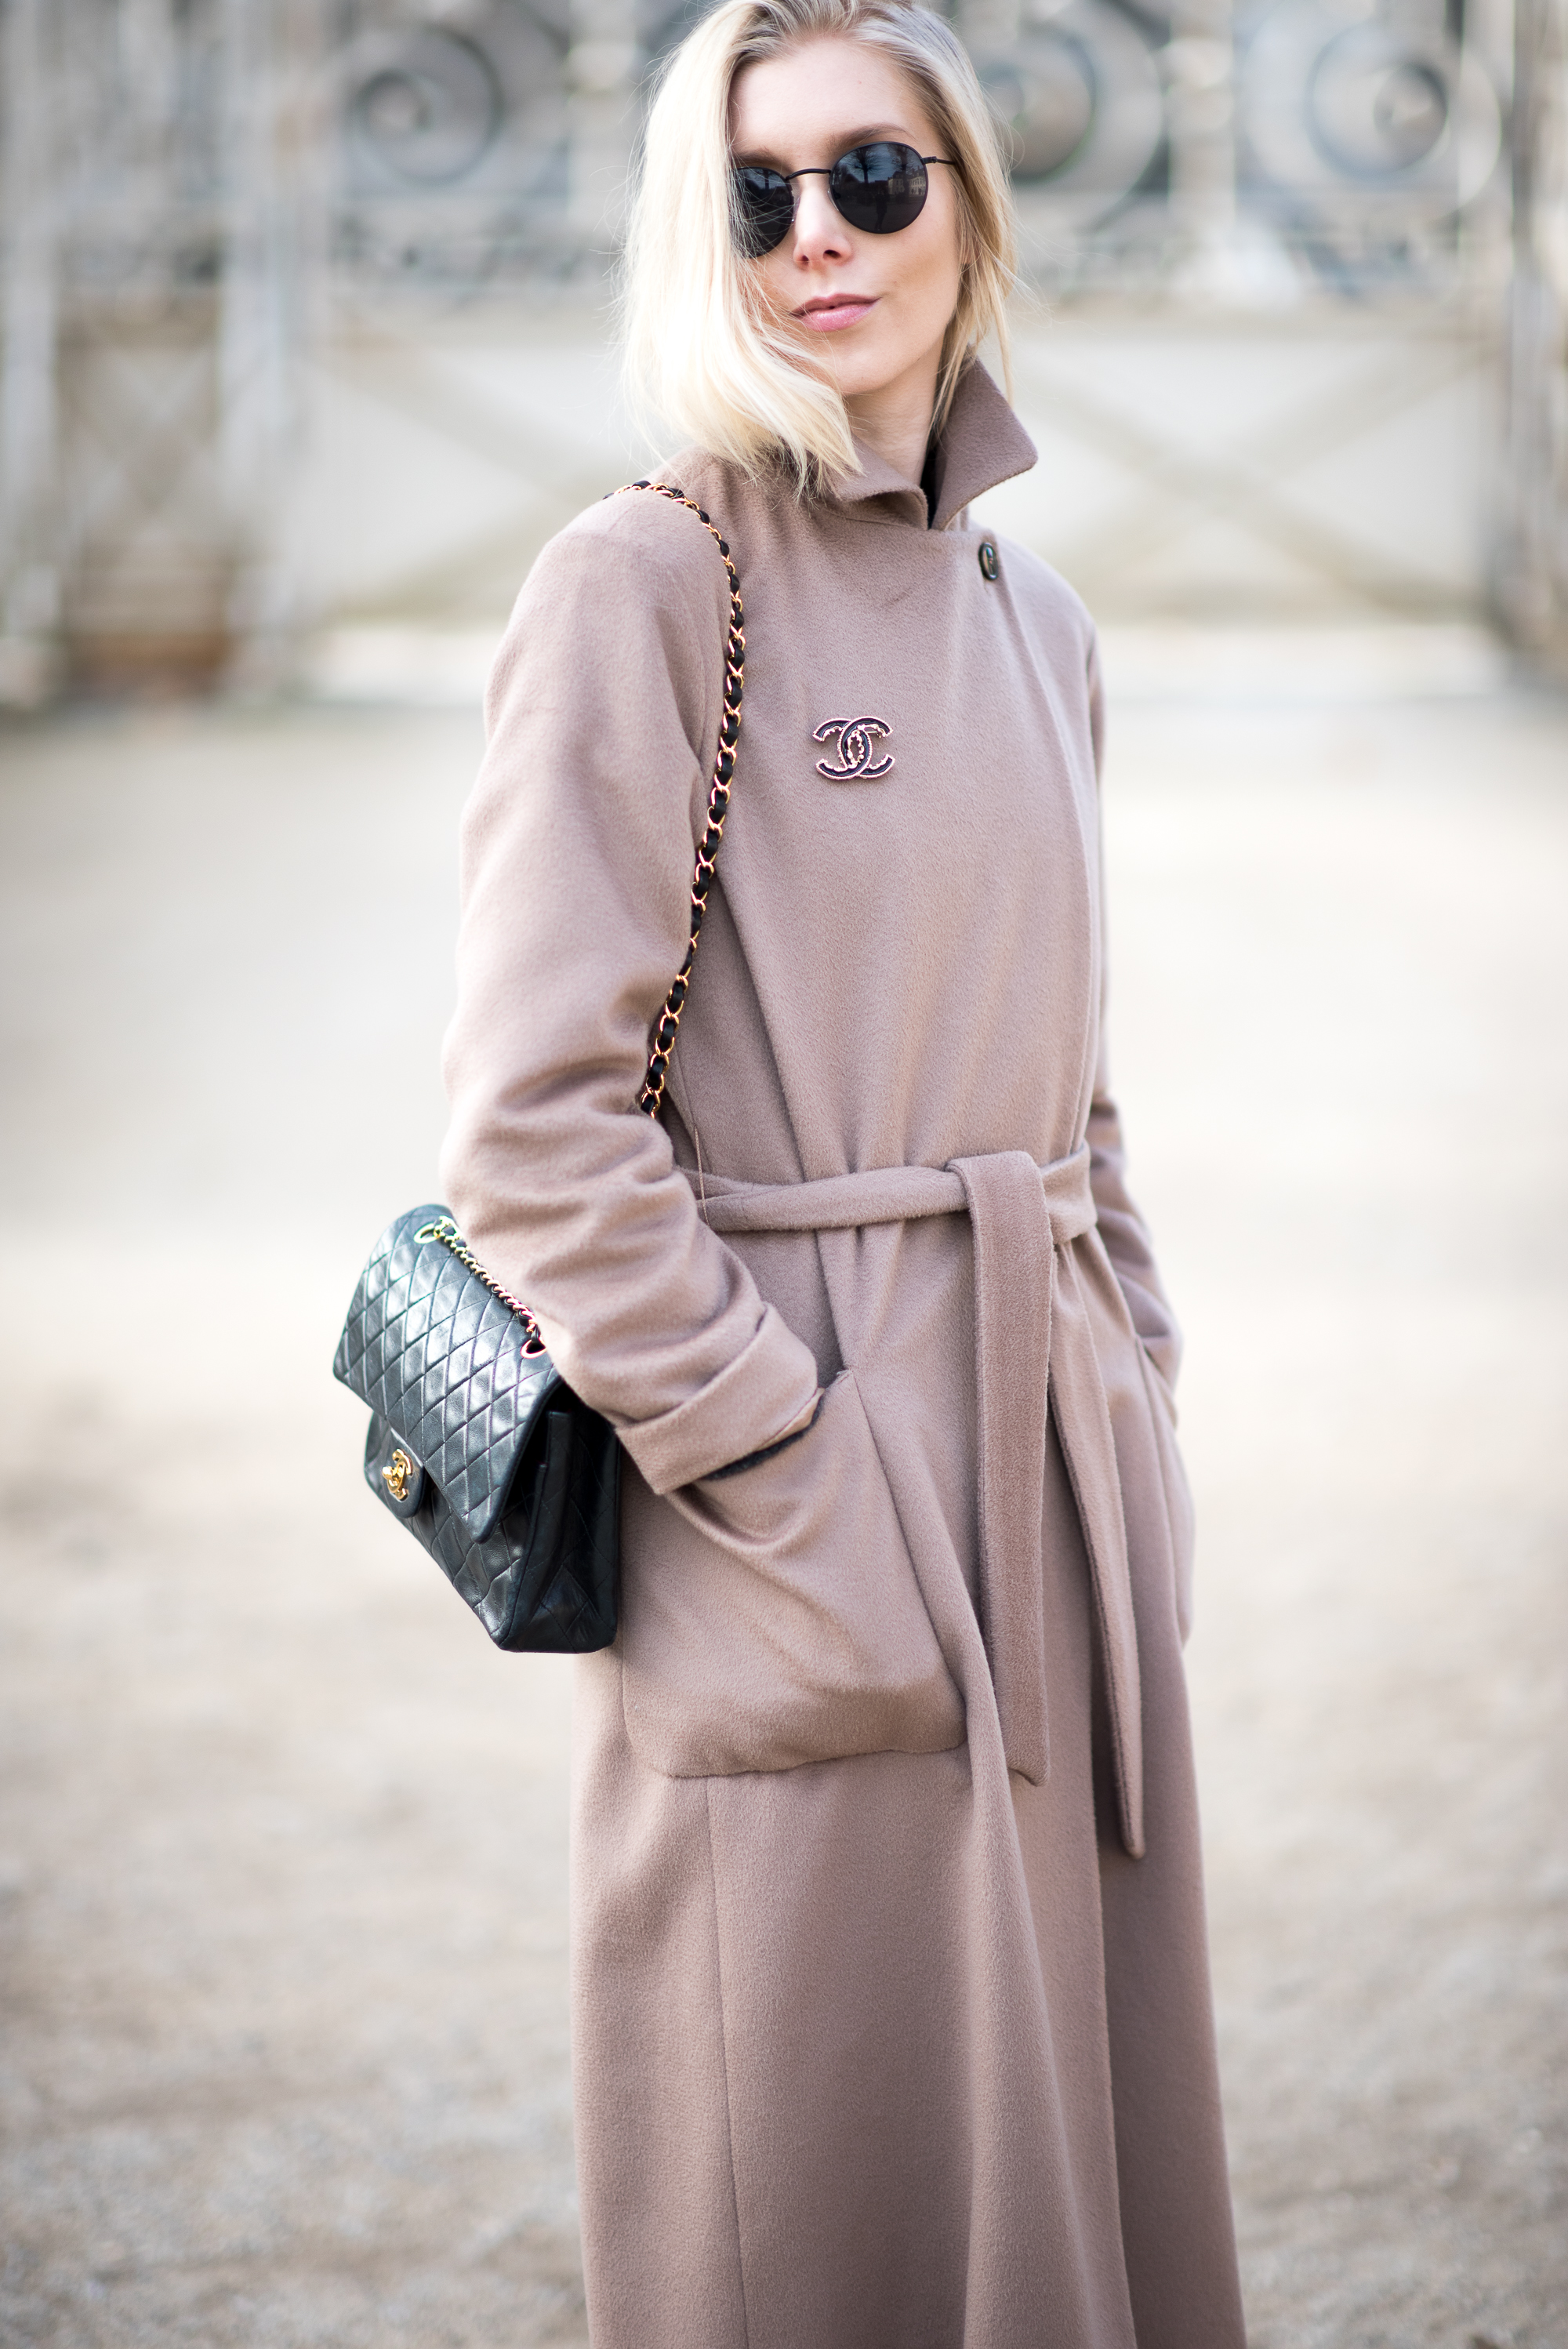 WRAPPED IN A CAMEL COAT – STYLE PLAZA